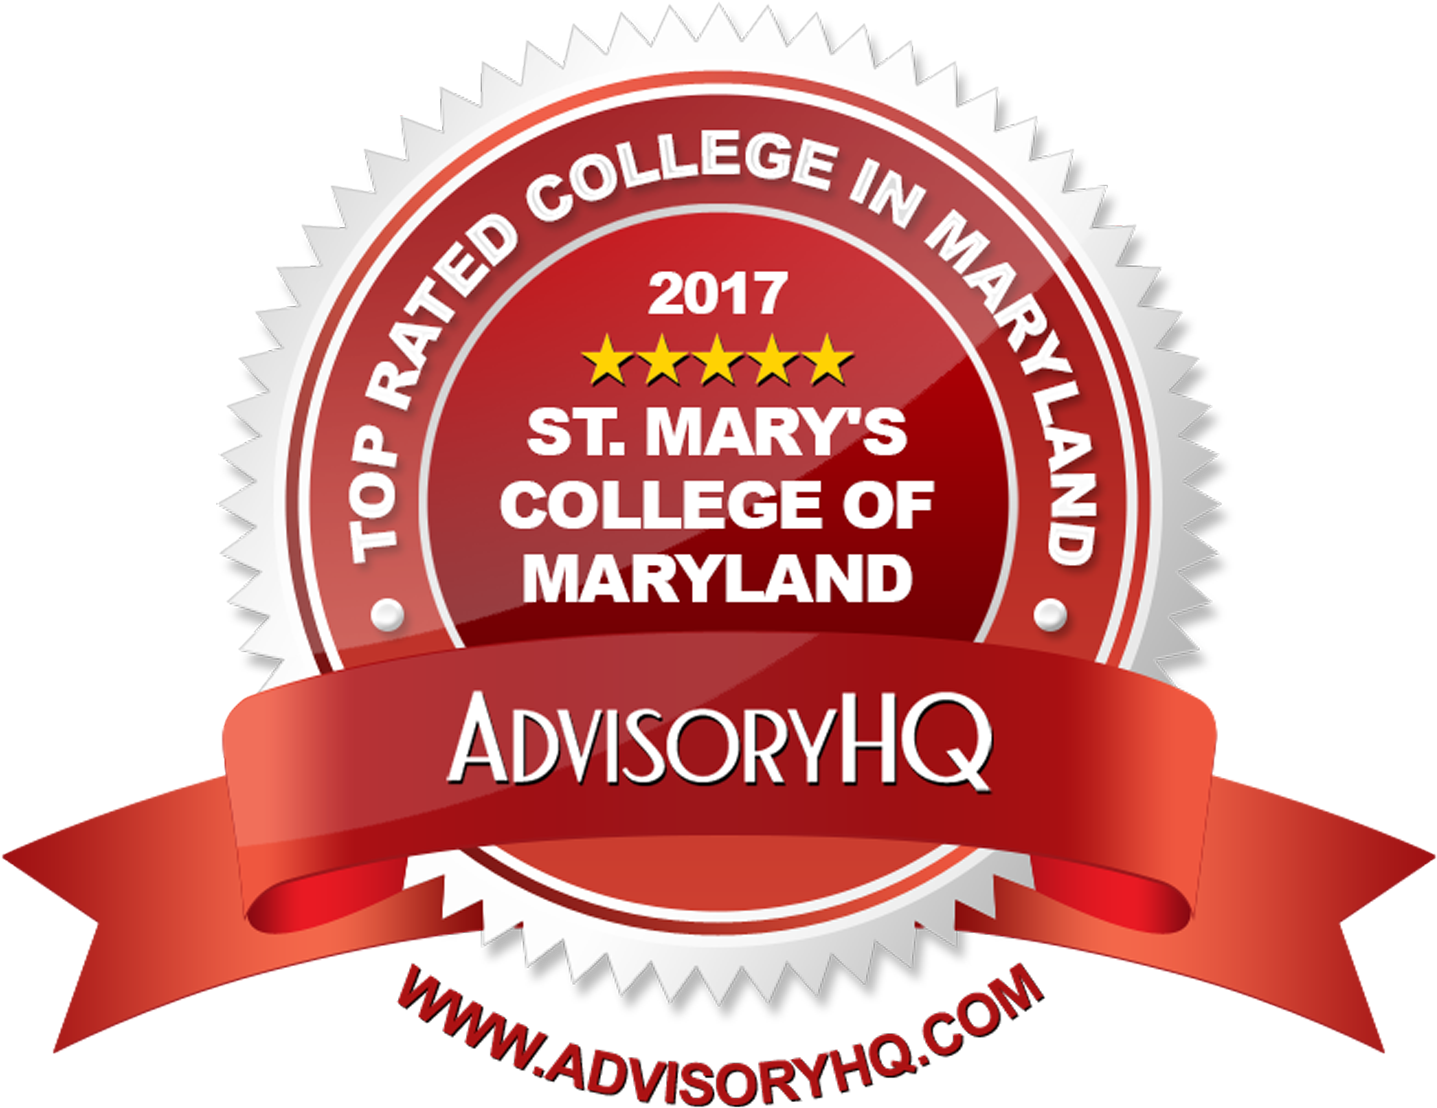 Mary's College Only Public College Included In Advisoryhq - Best Consultation Company Award (2000x1469), Png Download